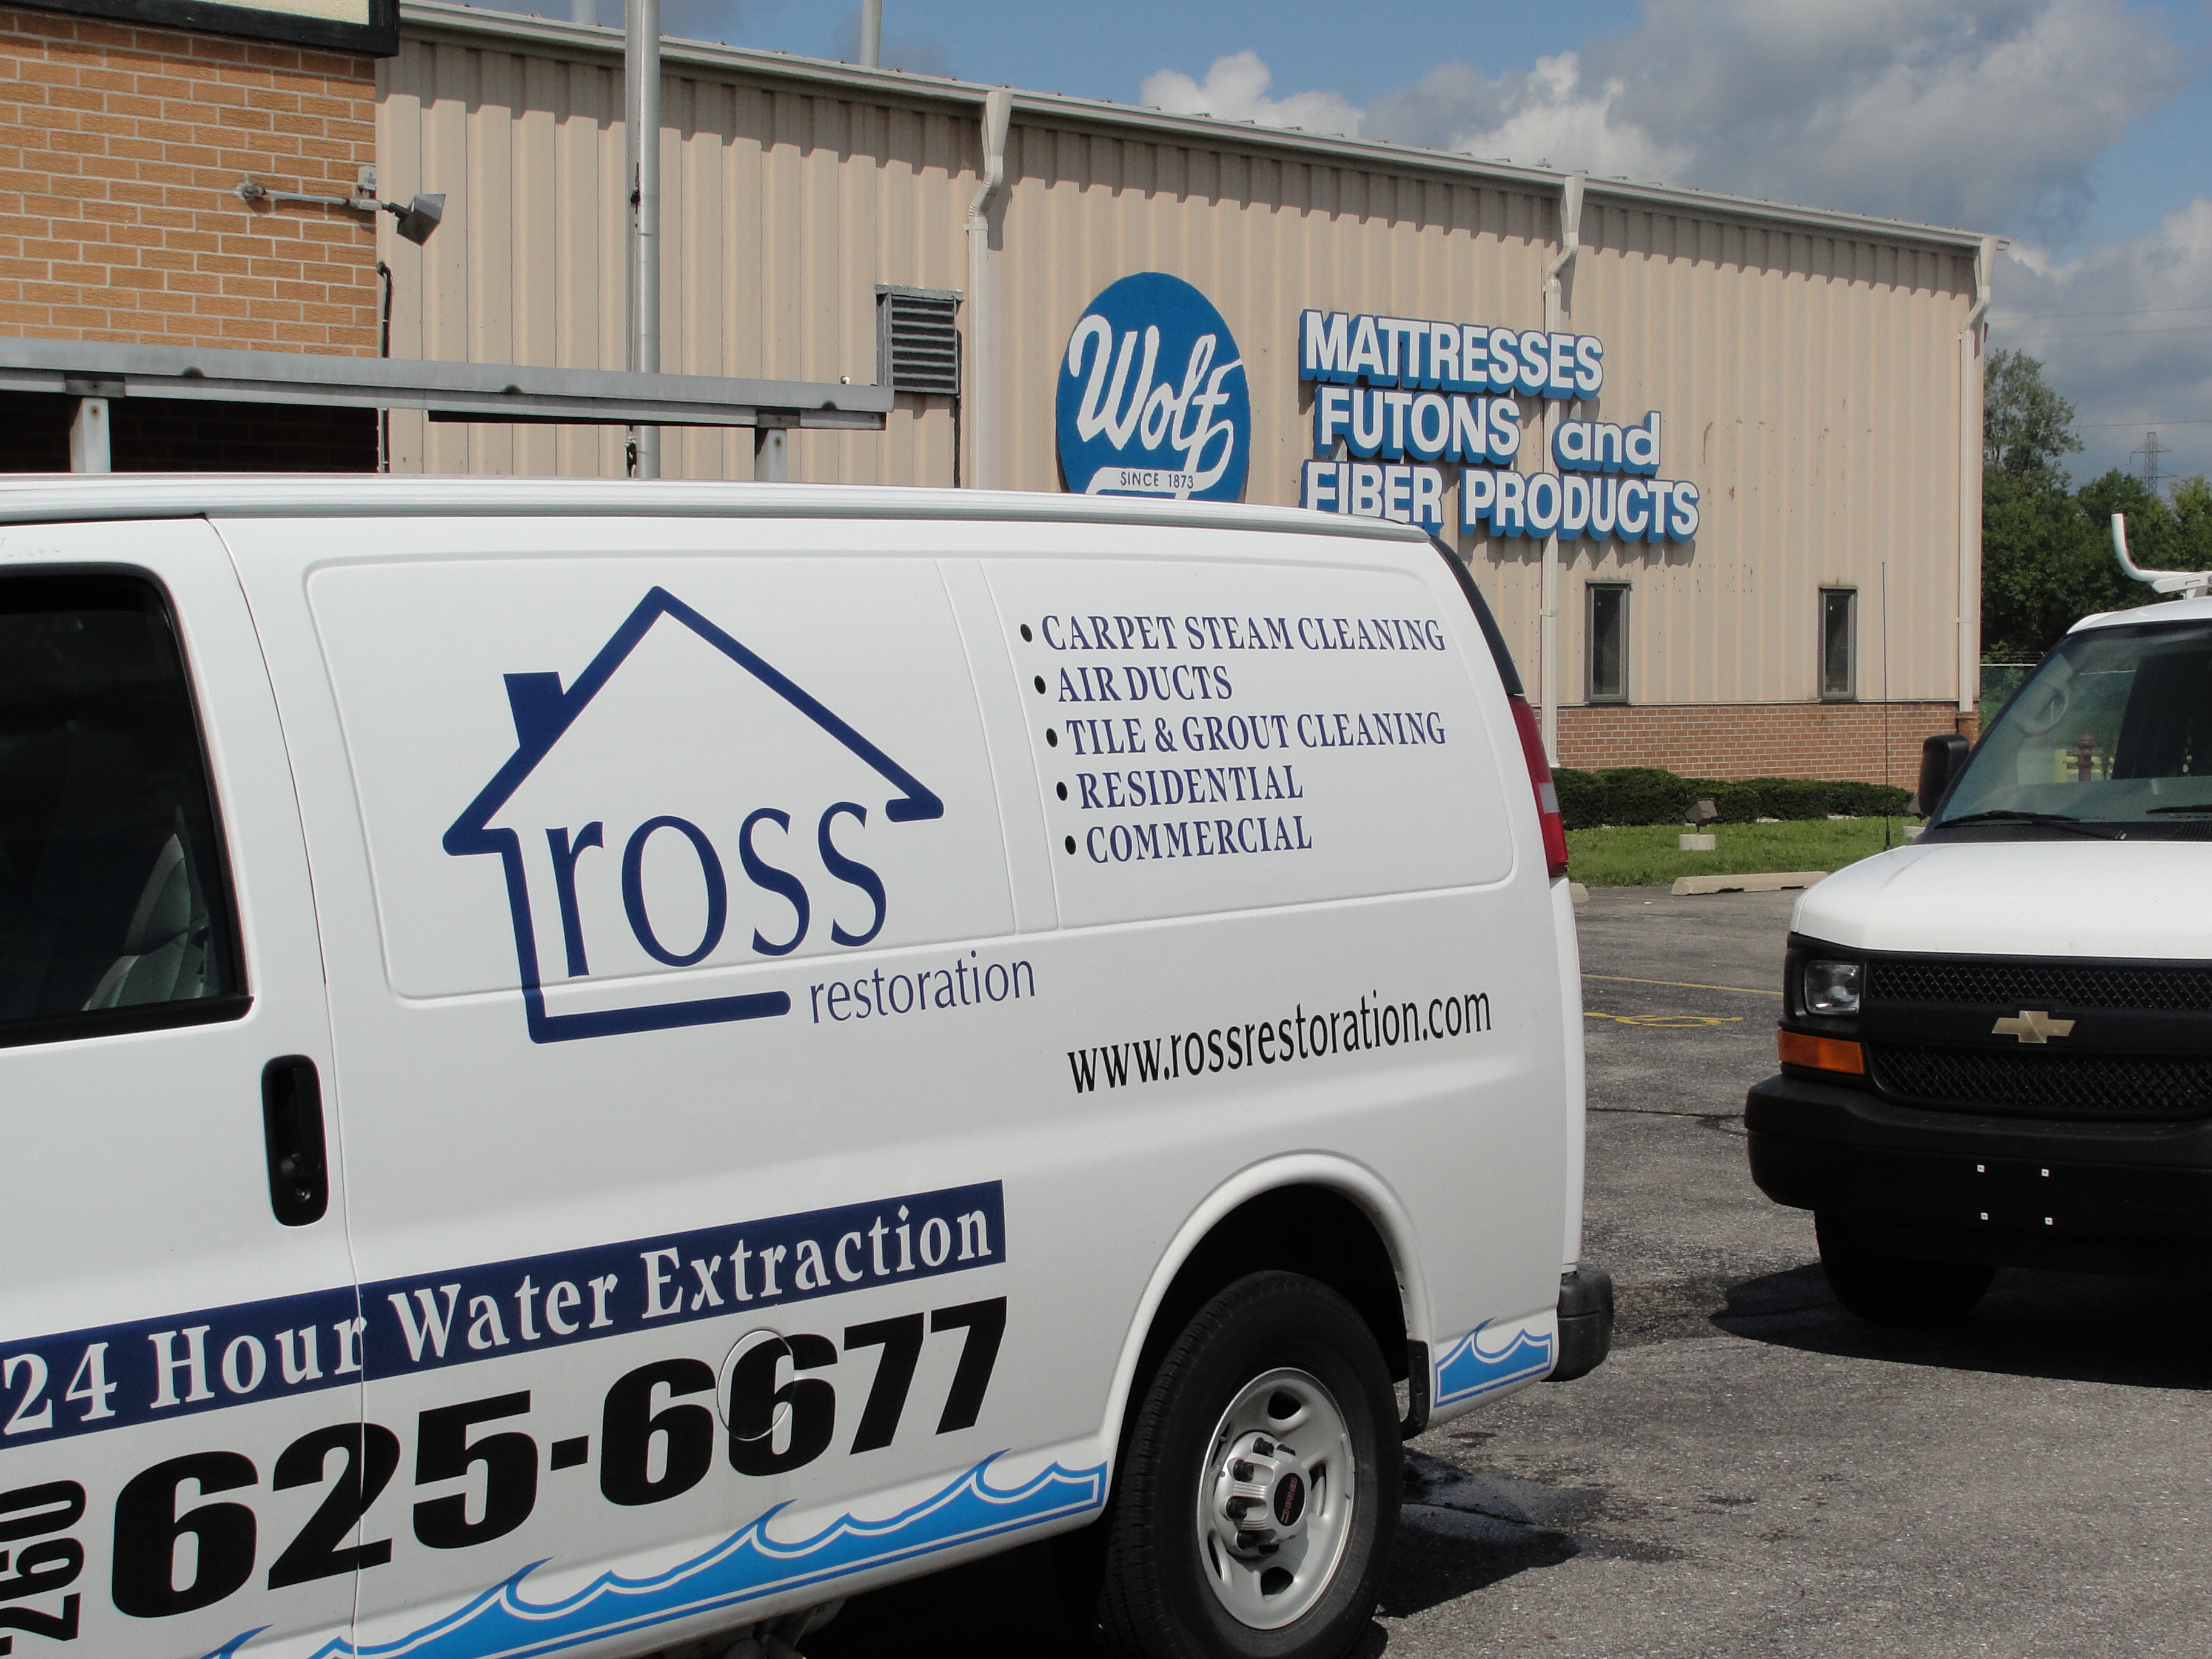 Ross Cleaning & Restoration Inc Photo